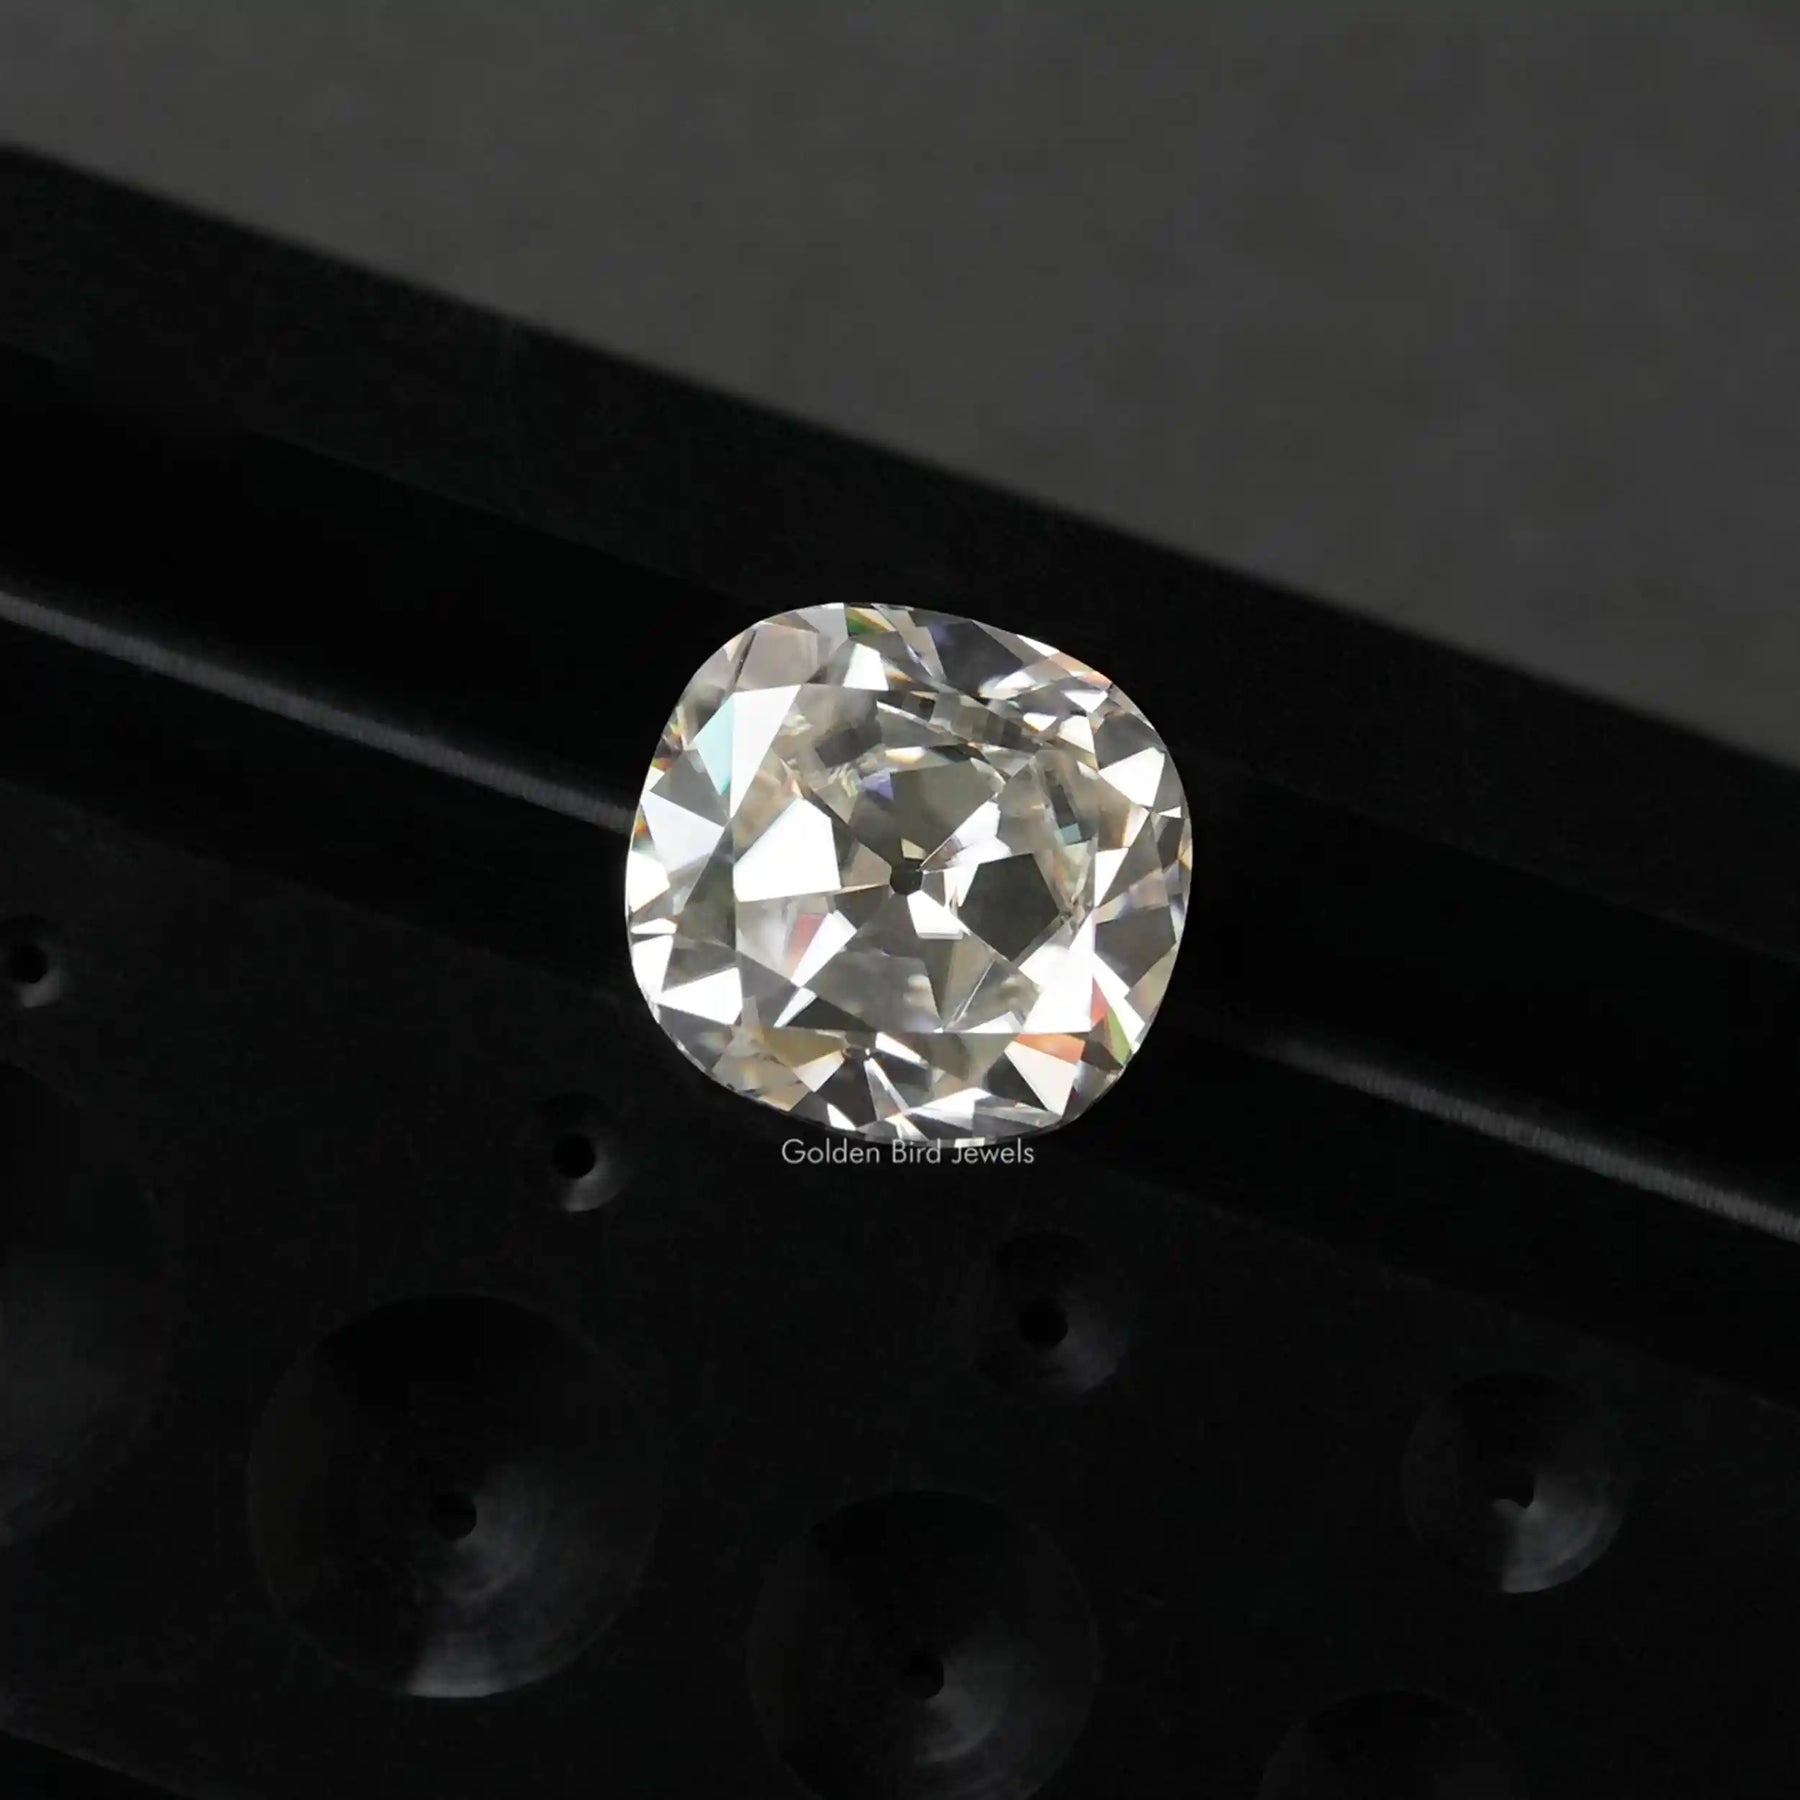 [Moissanite cushion cut loose stone crafted with colorless color]-[Golden Bird Jewels]